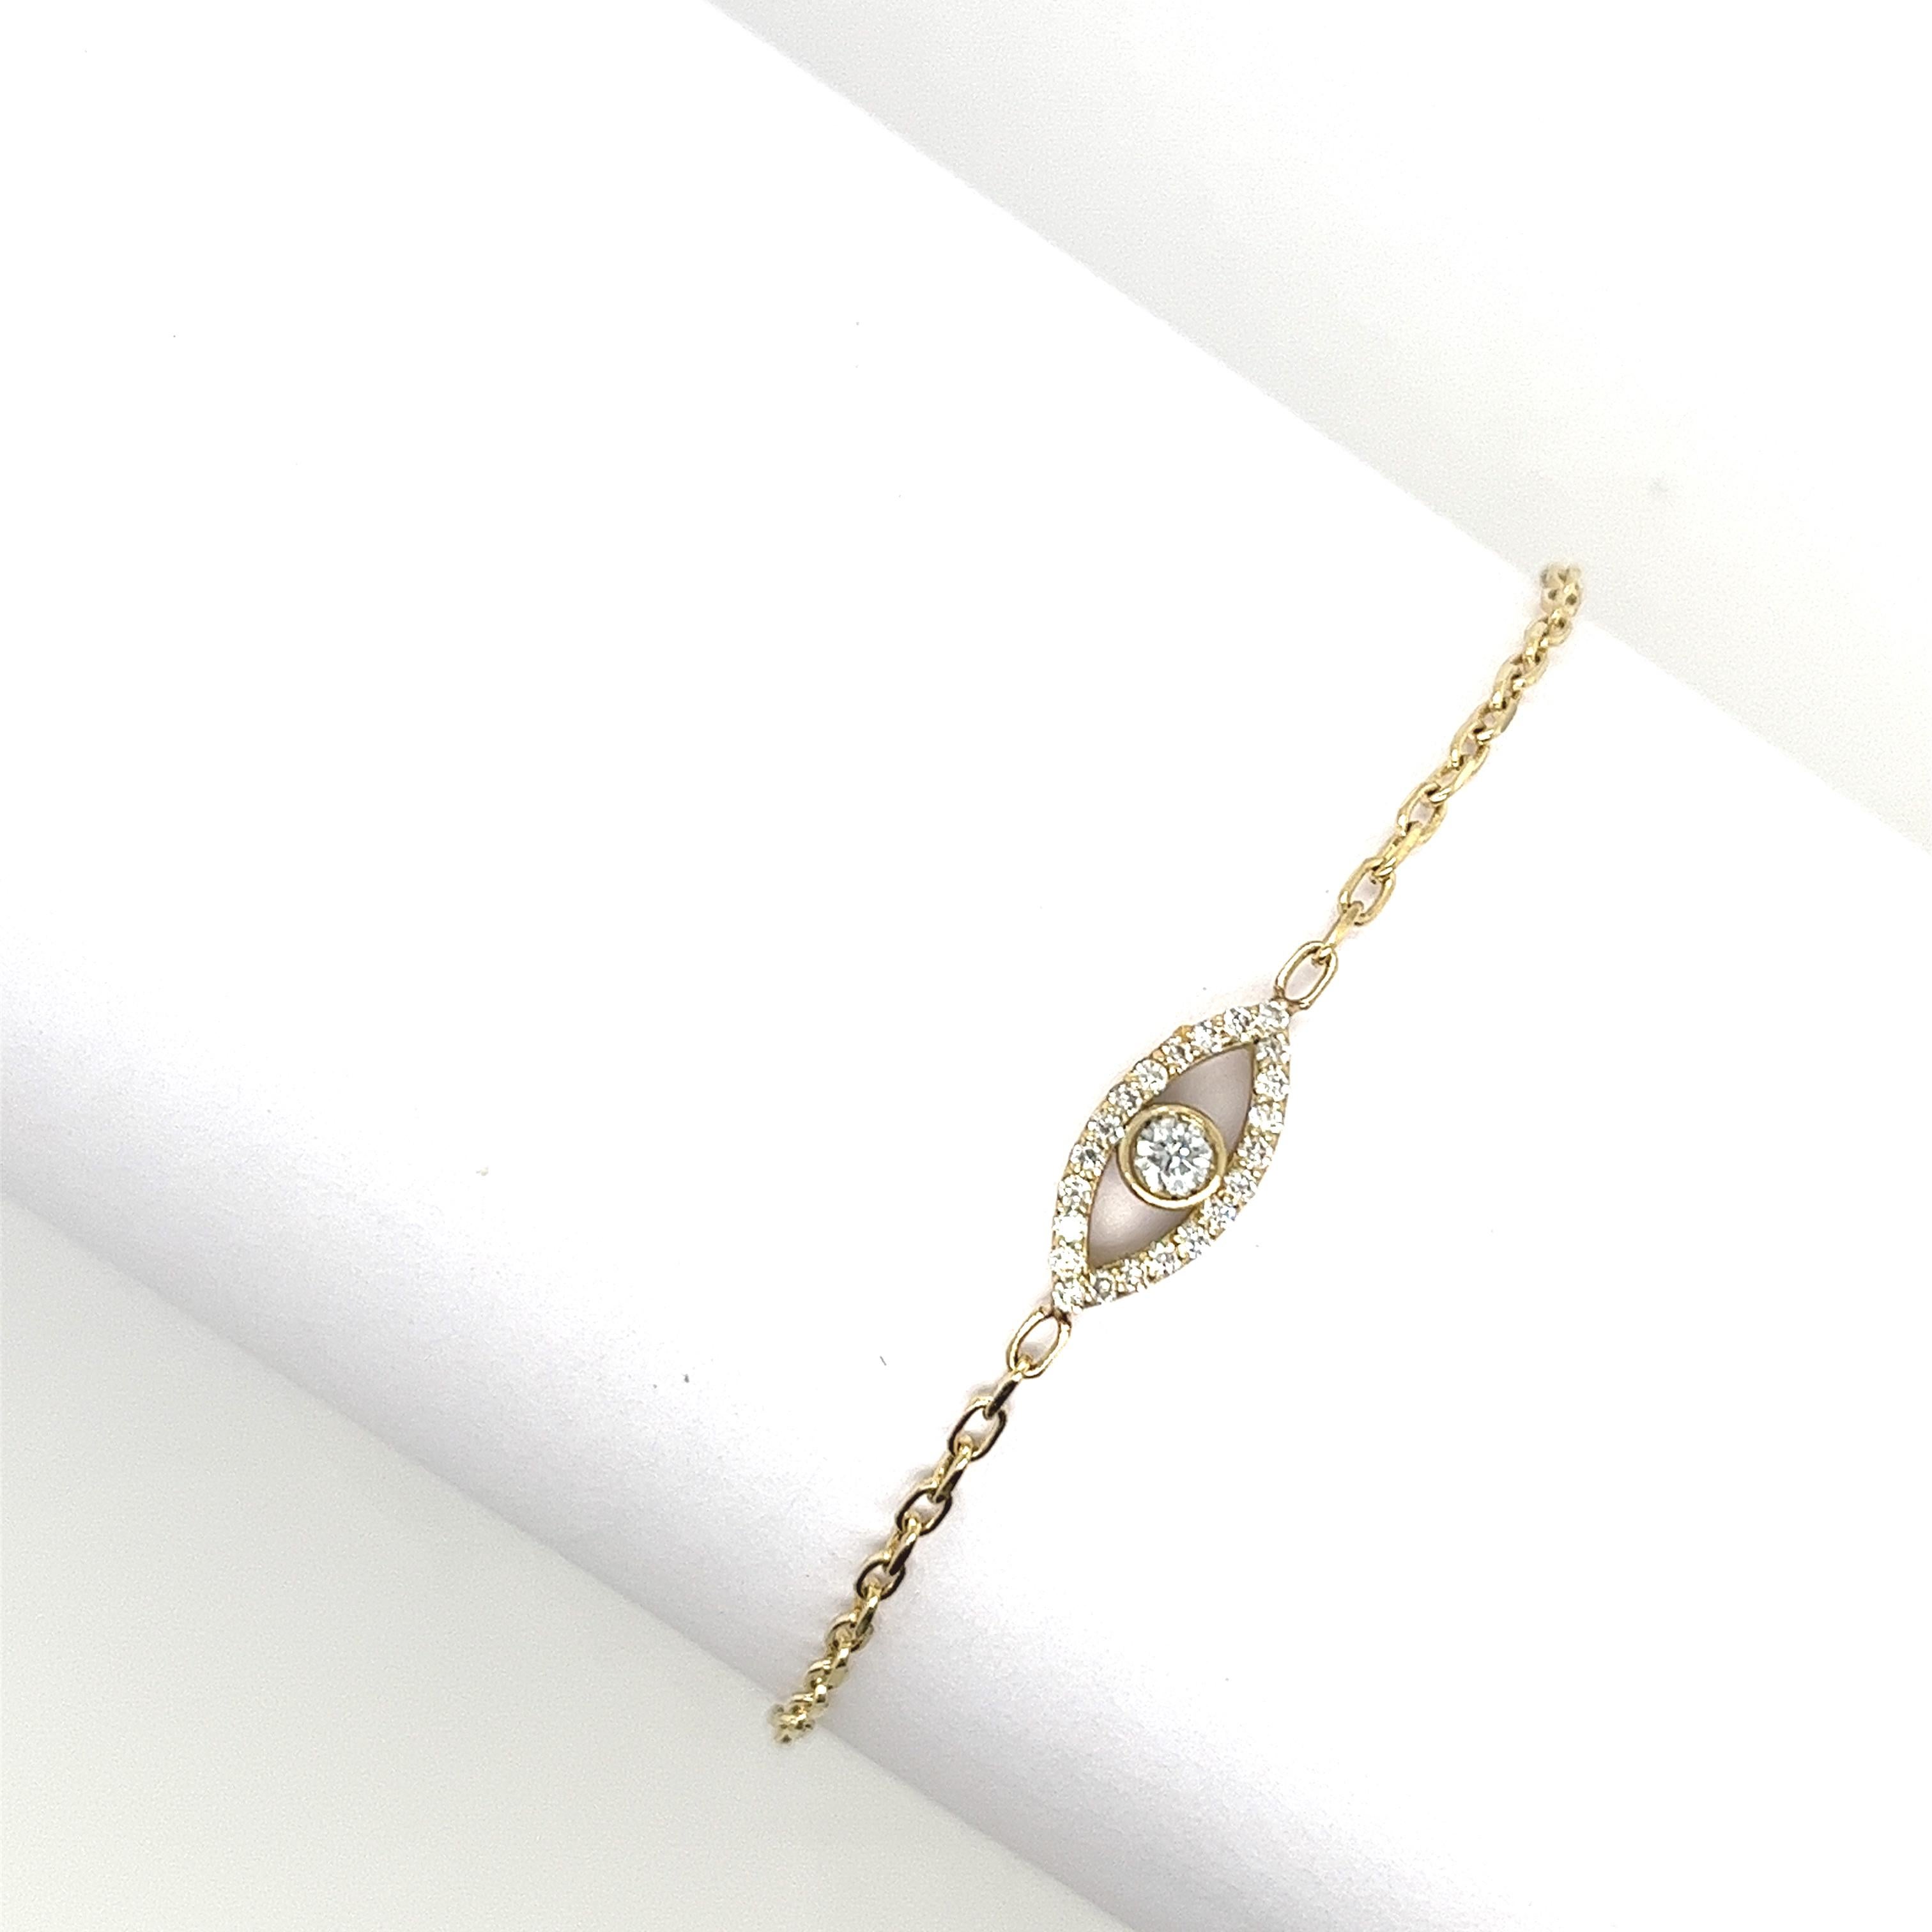 Made by Jewellery Cave- our exquisite 0.18ct diamond set evil eye bracelet—an enchanting fusion of style and symbolism. Crafted in 9ct yellow gold, the centrepiece of this mesmerizing bracelet is the striking Evil Eye charm, symbolizing protection